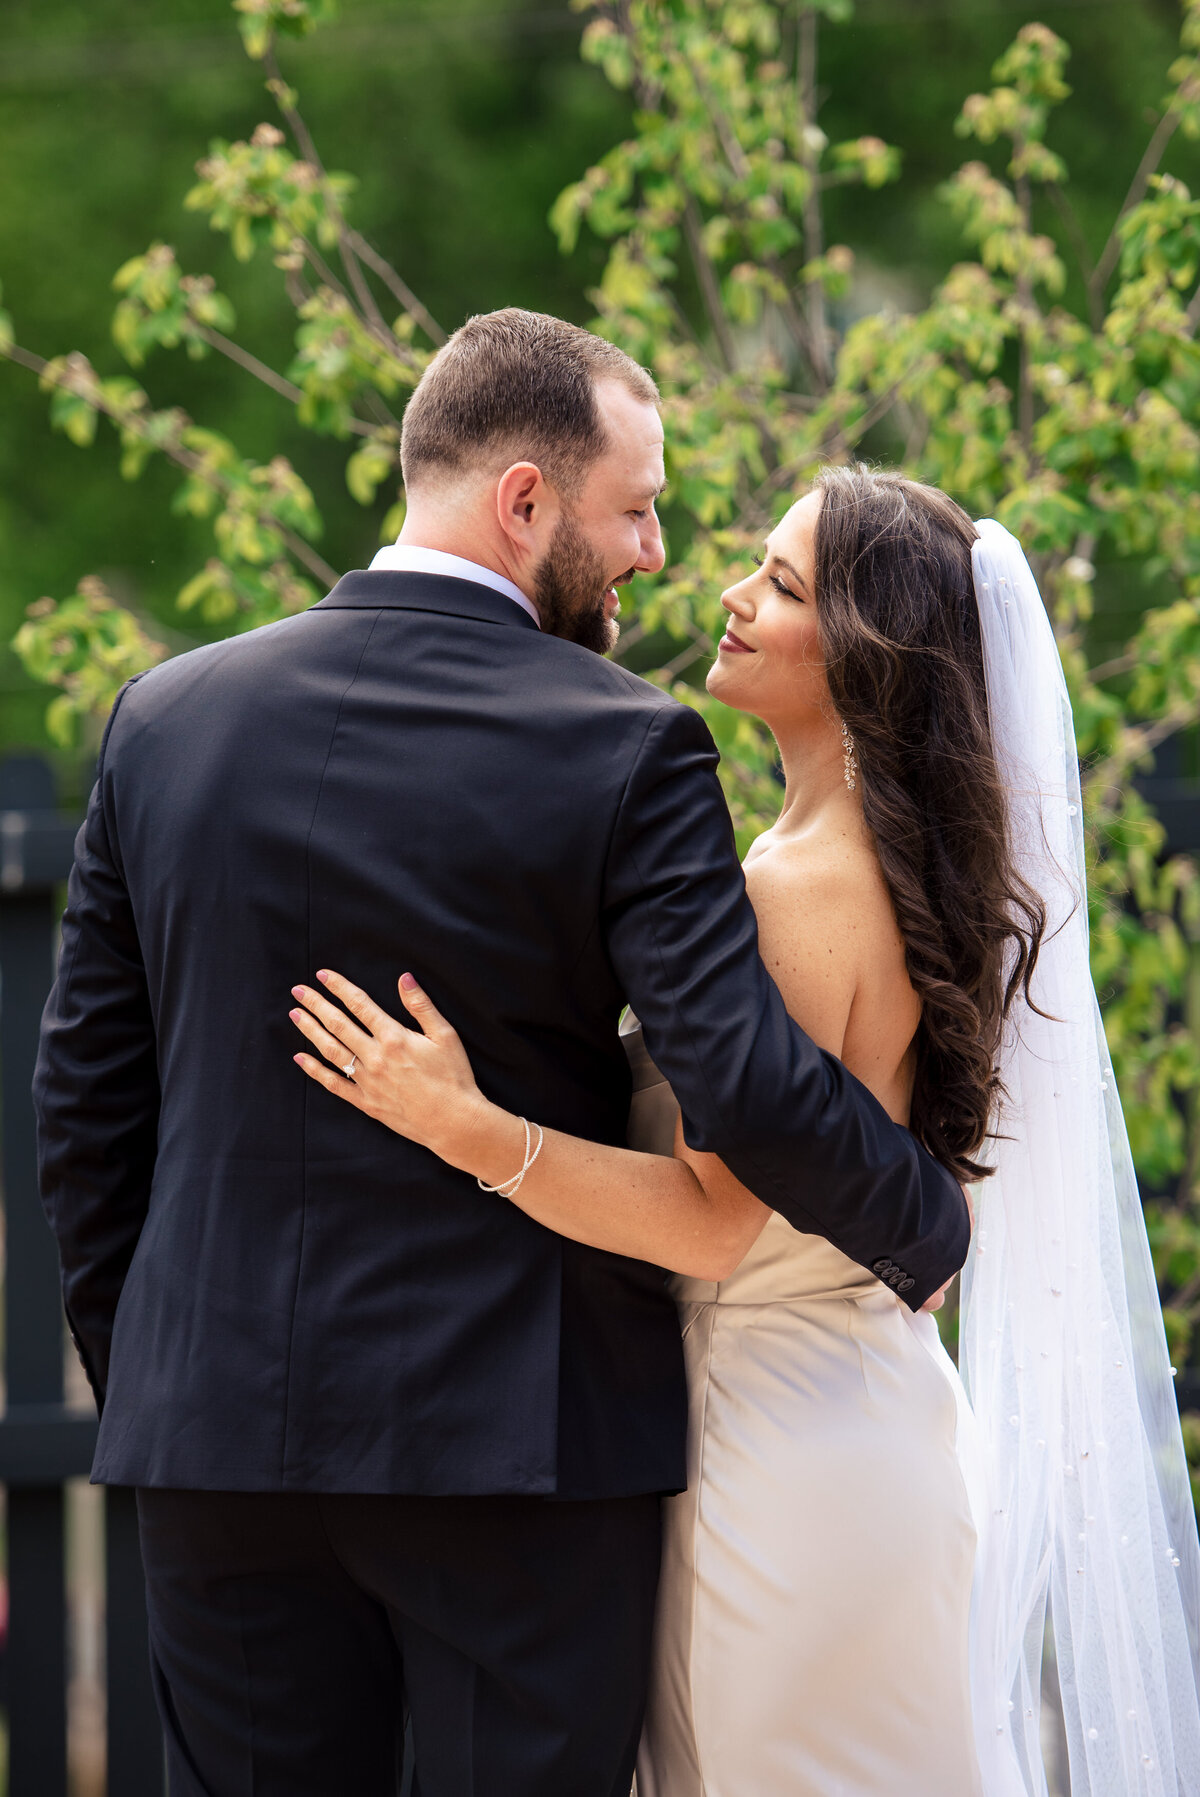 Portrait-of-bride-and-groom-looking-into-each-other's-eyes-and-smiling-with-their-arms-around-each-other-backs-to-the-camera-amid-greenery-outside-Upstairs-Atlanta